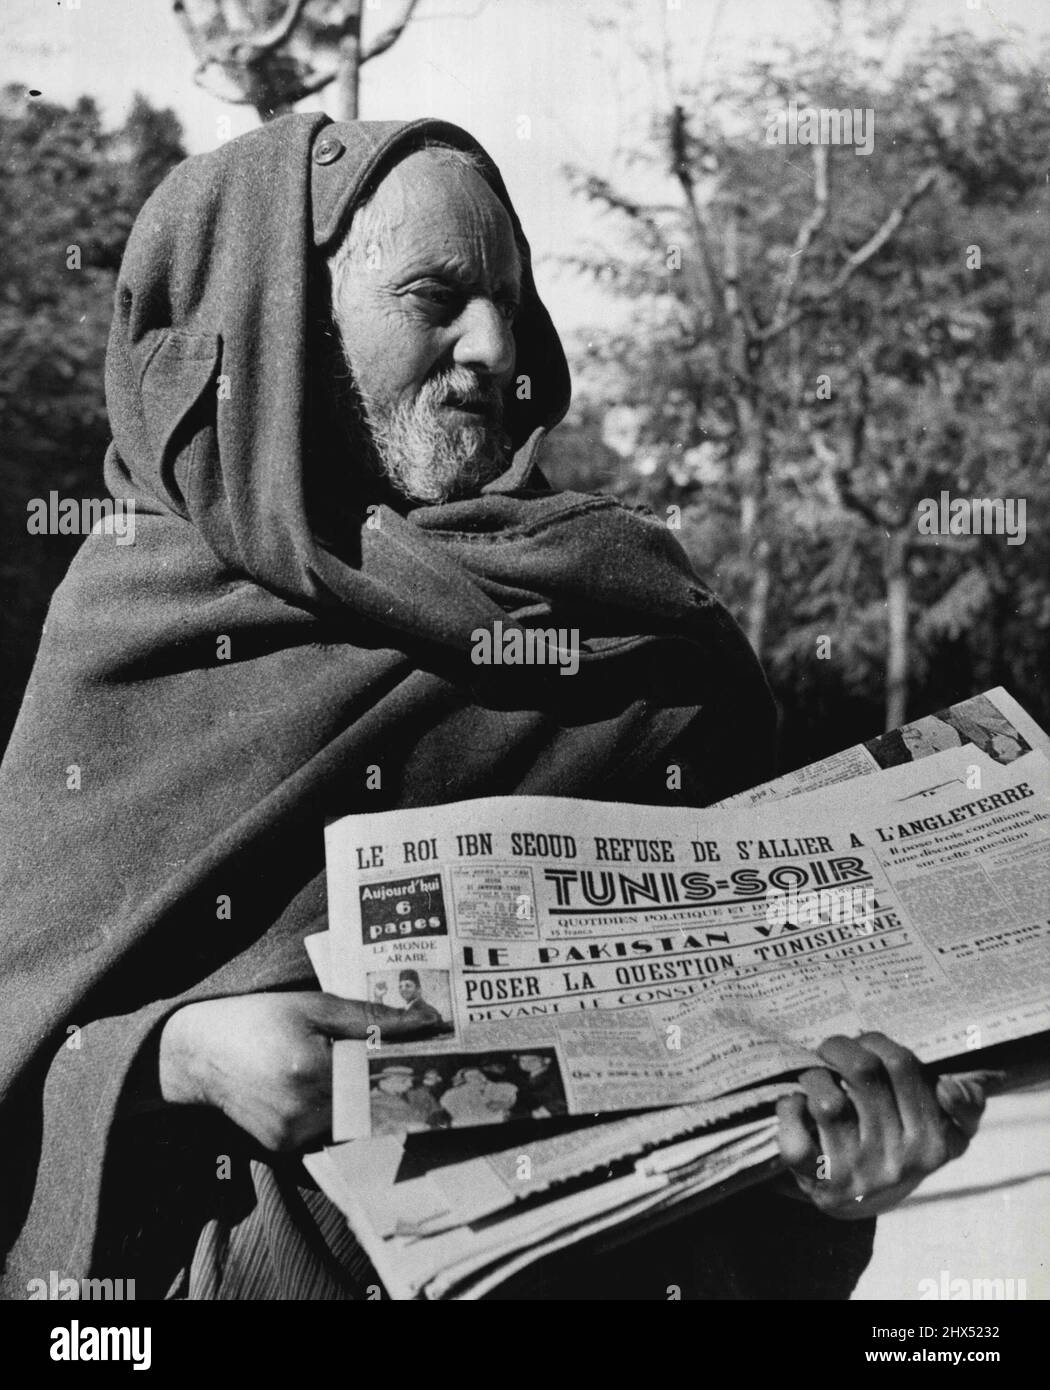 A Hooded Arab 'Newsboy' hawks one of the French Language newspapers in a screeching voice in downtown Tunis. Note that the headline plays up king lbn Saud's Rejection of alliance with England. February 29, 1952. (Photo by United Press). Stock Photo